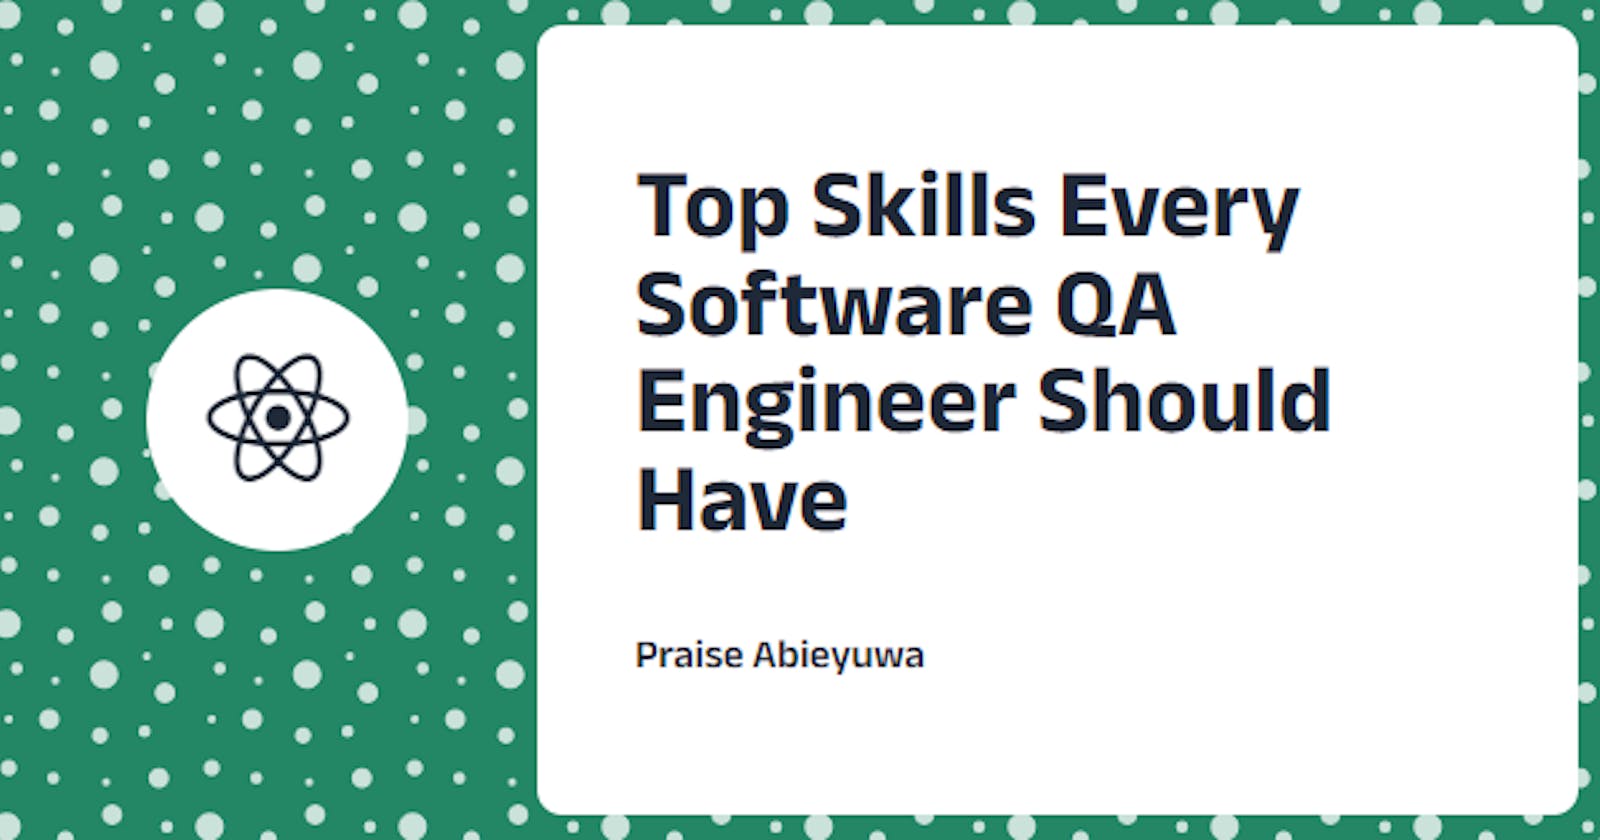 Top Skills Every Software QA Engineer Should Have